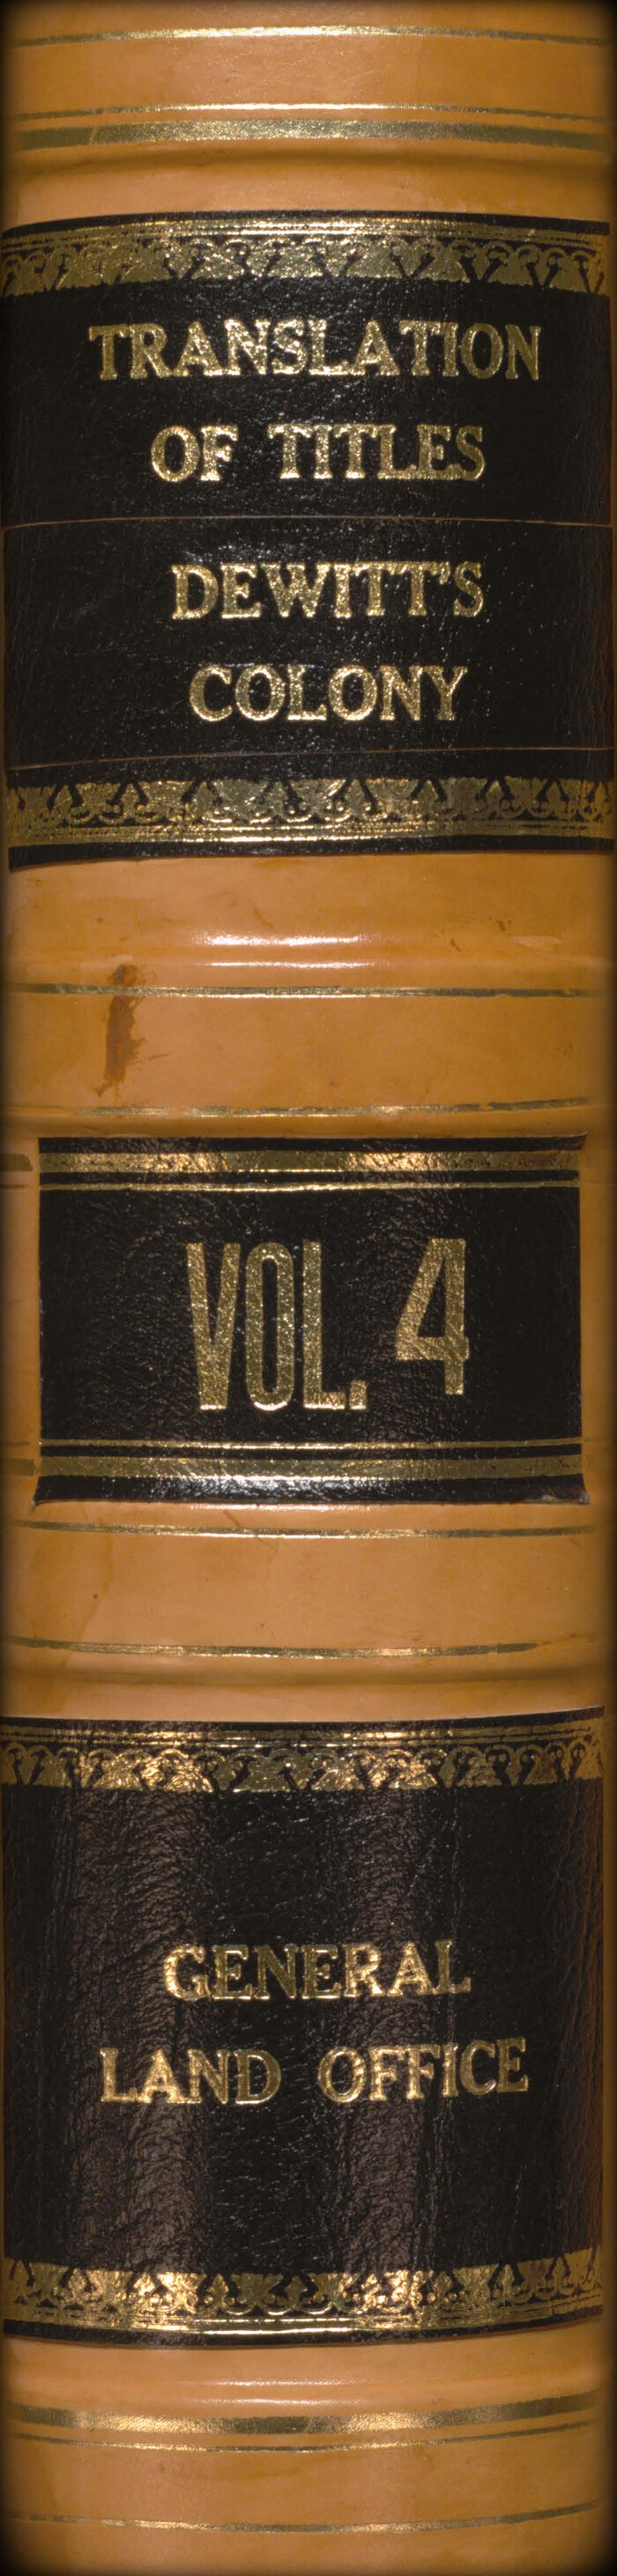 94549, Record of Translations of Titles - DeWitt's Colony, Vol. 4, Historical Volumes